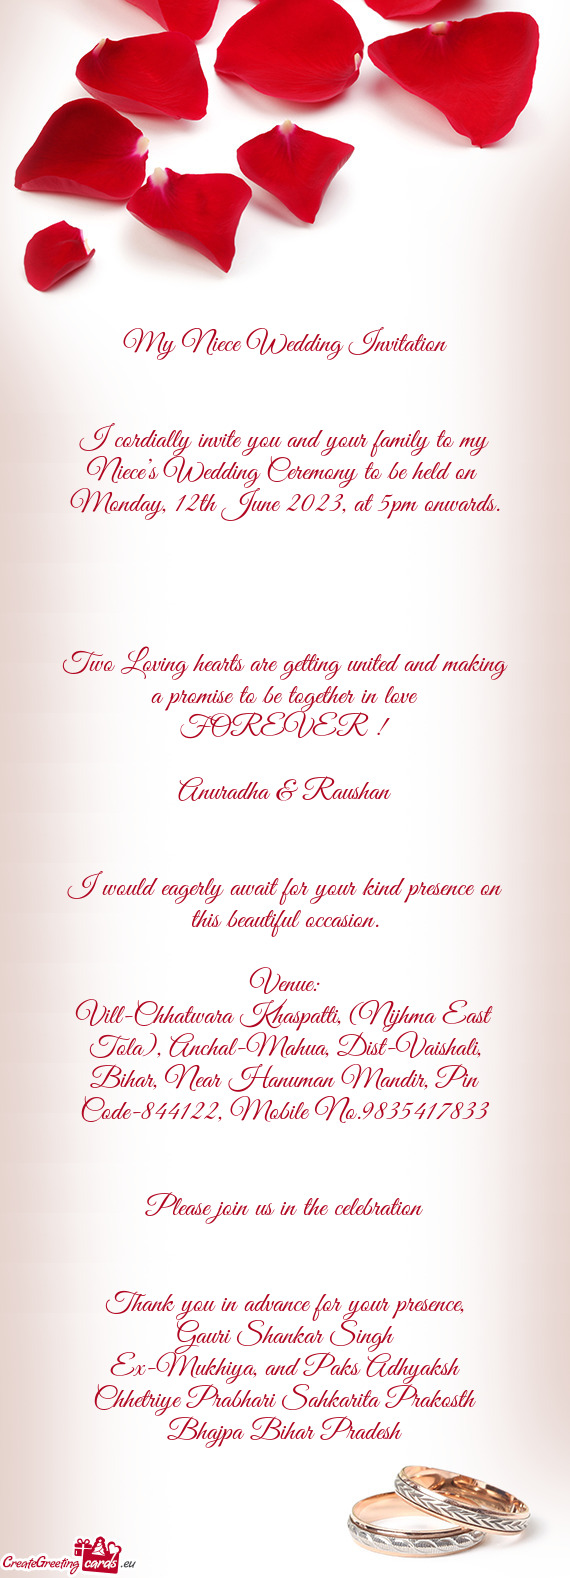 I cordially invite you and your family to my Niece’s Wedding Ceremony to be held on